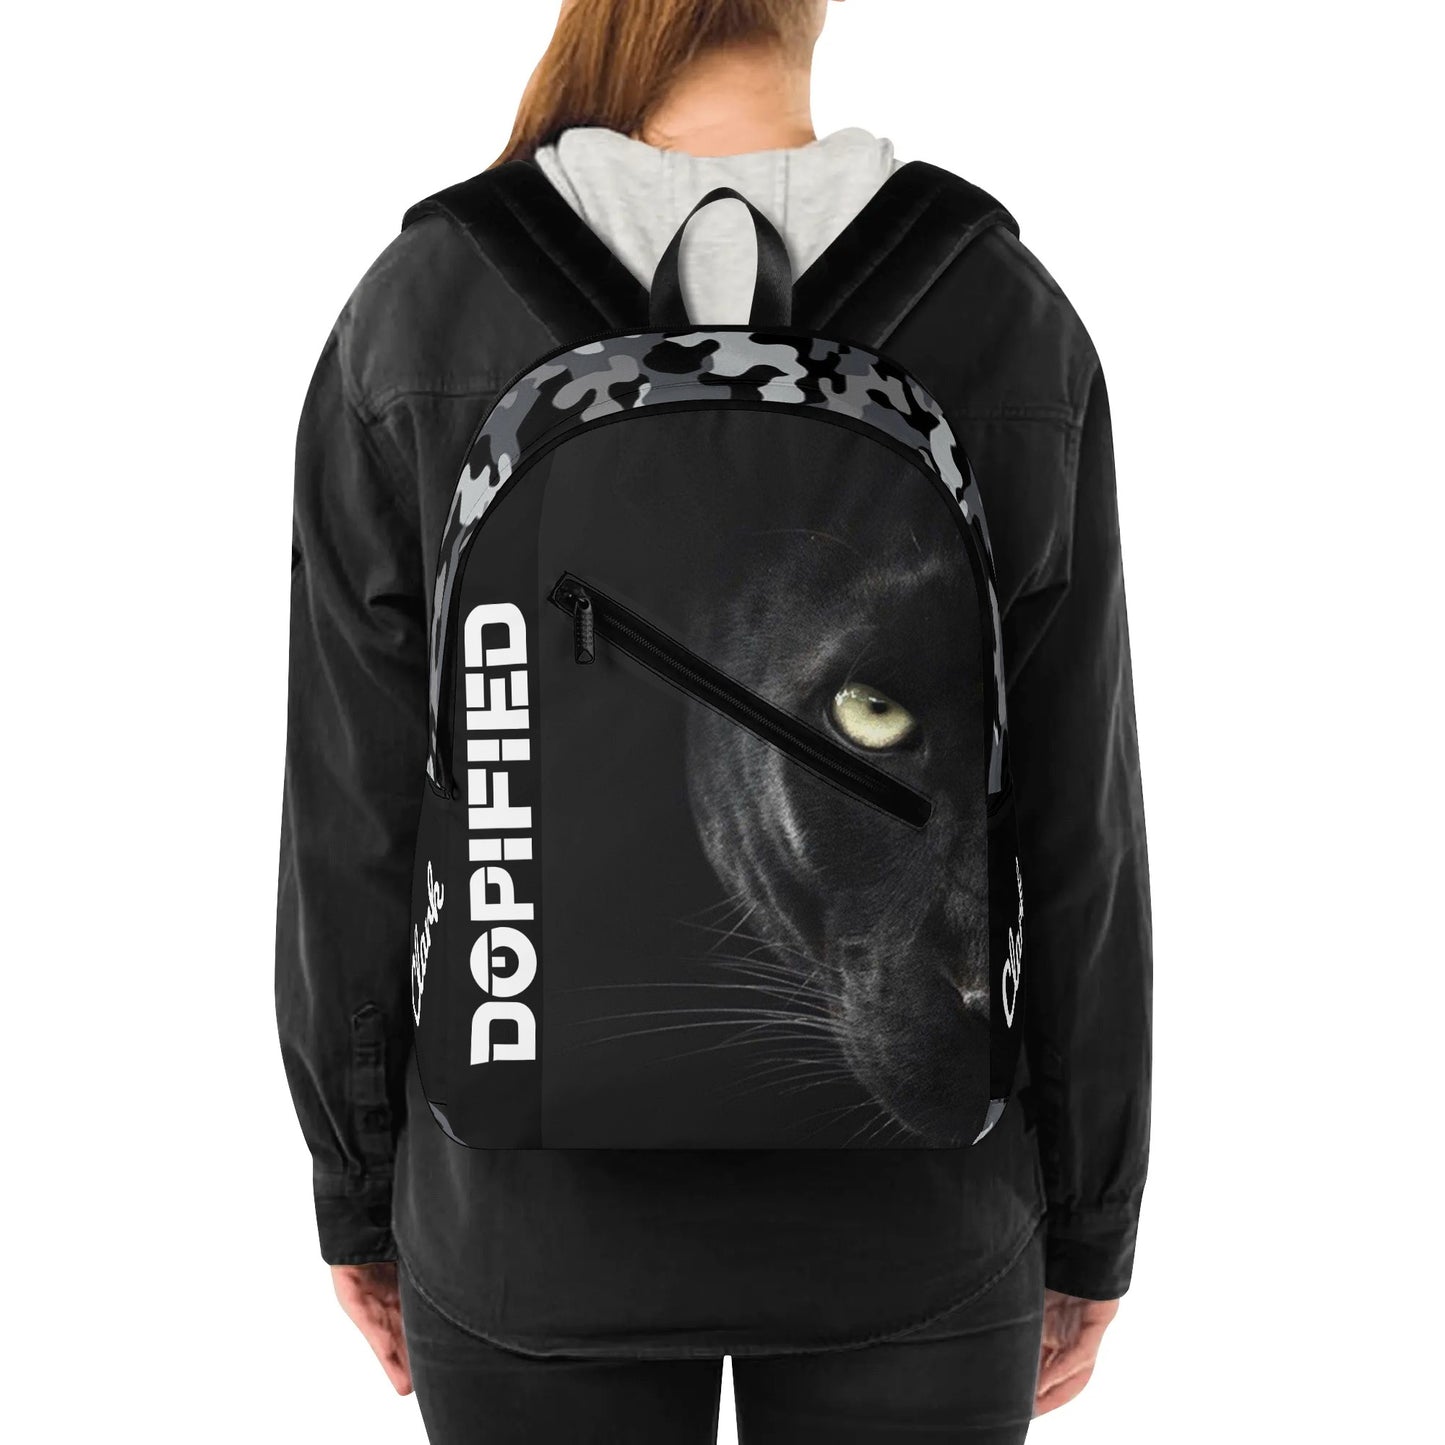 DOPiFiED Panther Laptop Backpack